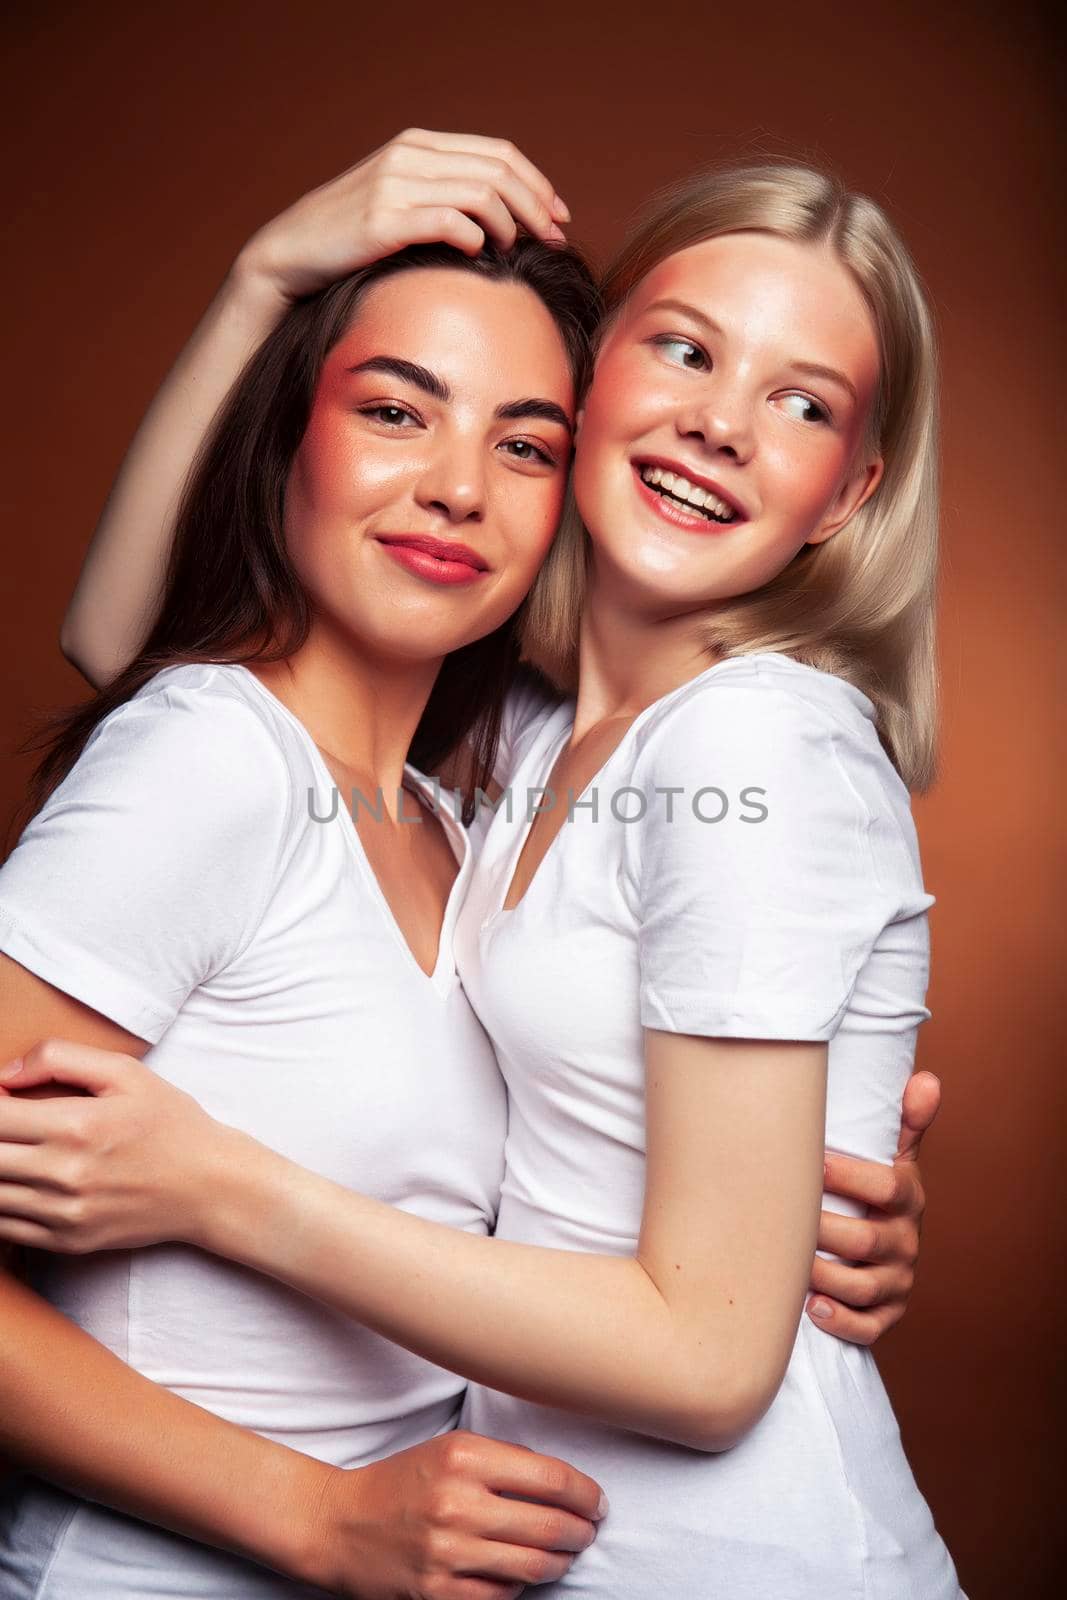 wo pretty diverse girls happy posing together: blond and brunette on brown background, lifestyle people concept by JordanJ